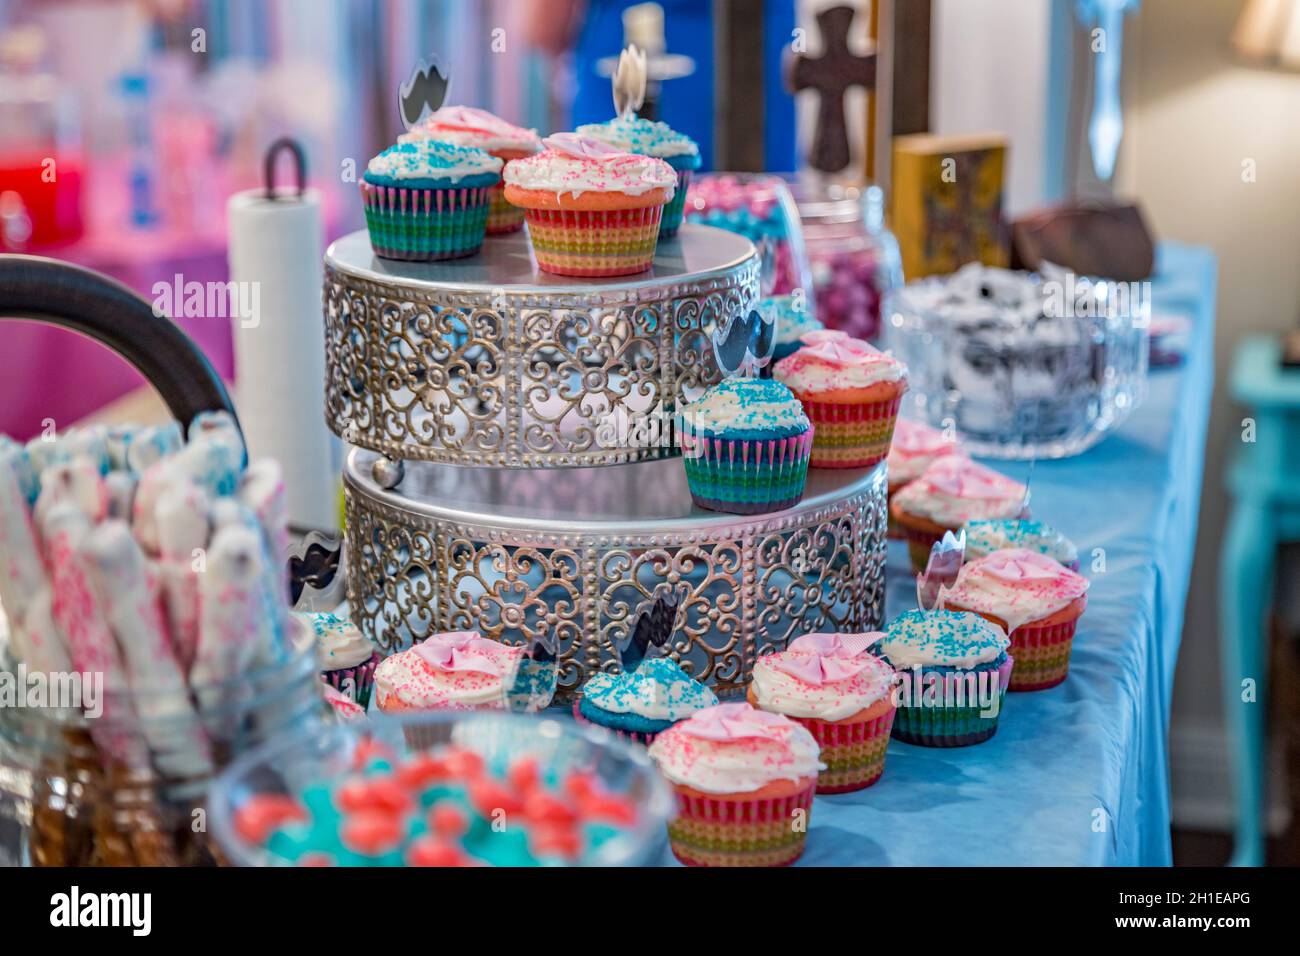 Cupcakes and candies in blue and pink at a gender reveal party Stock Photo